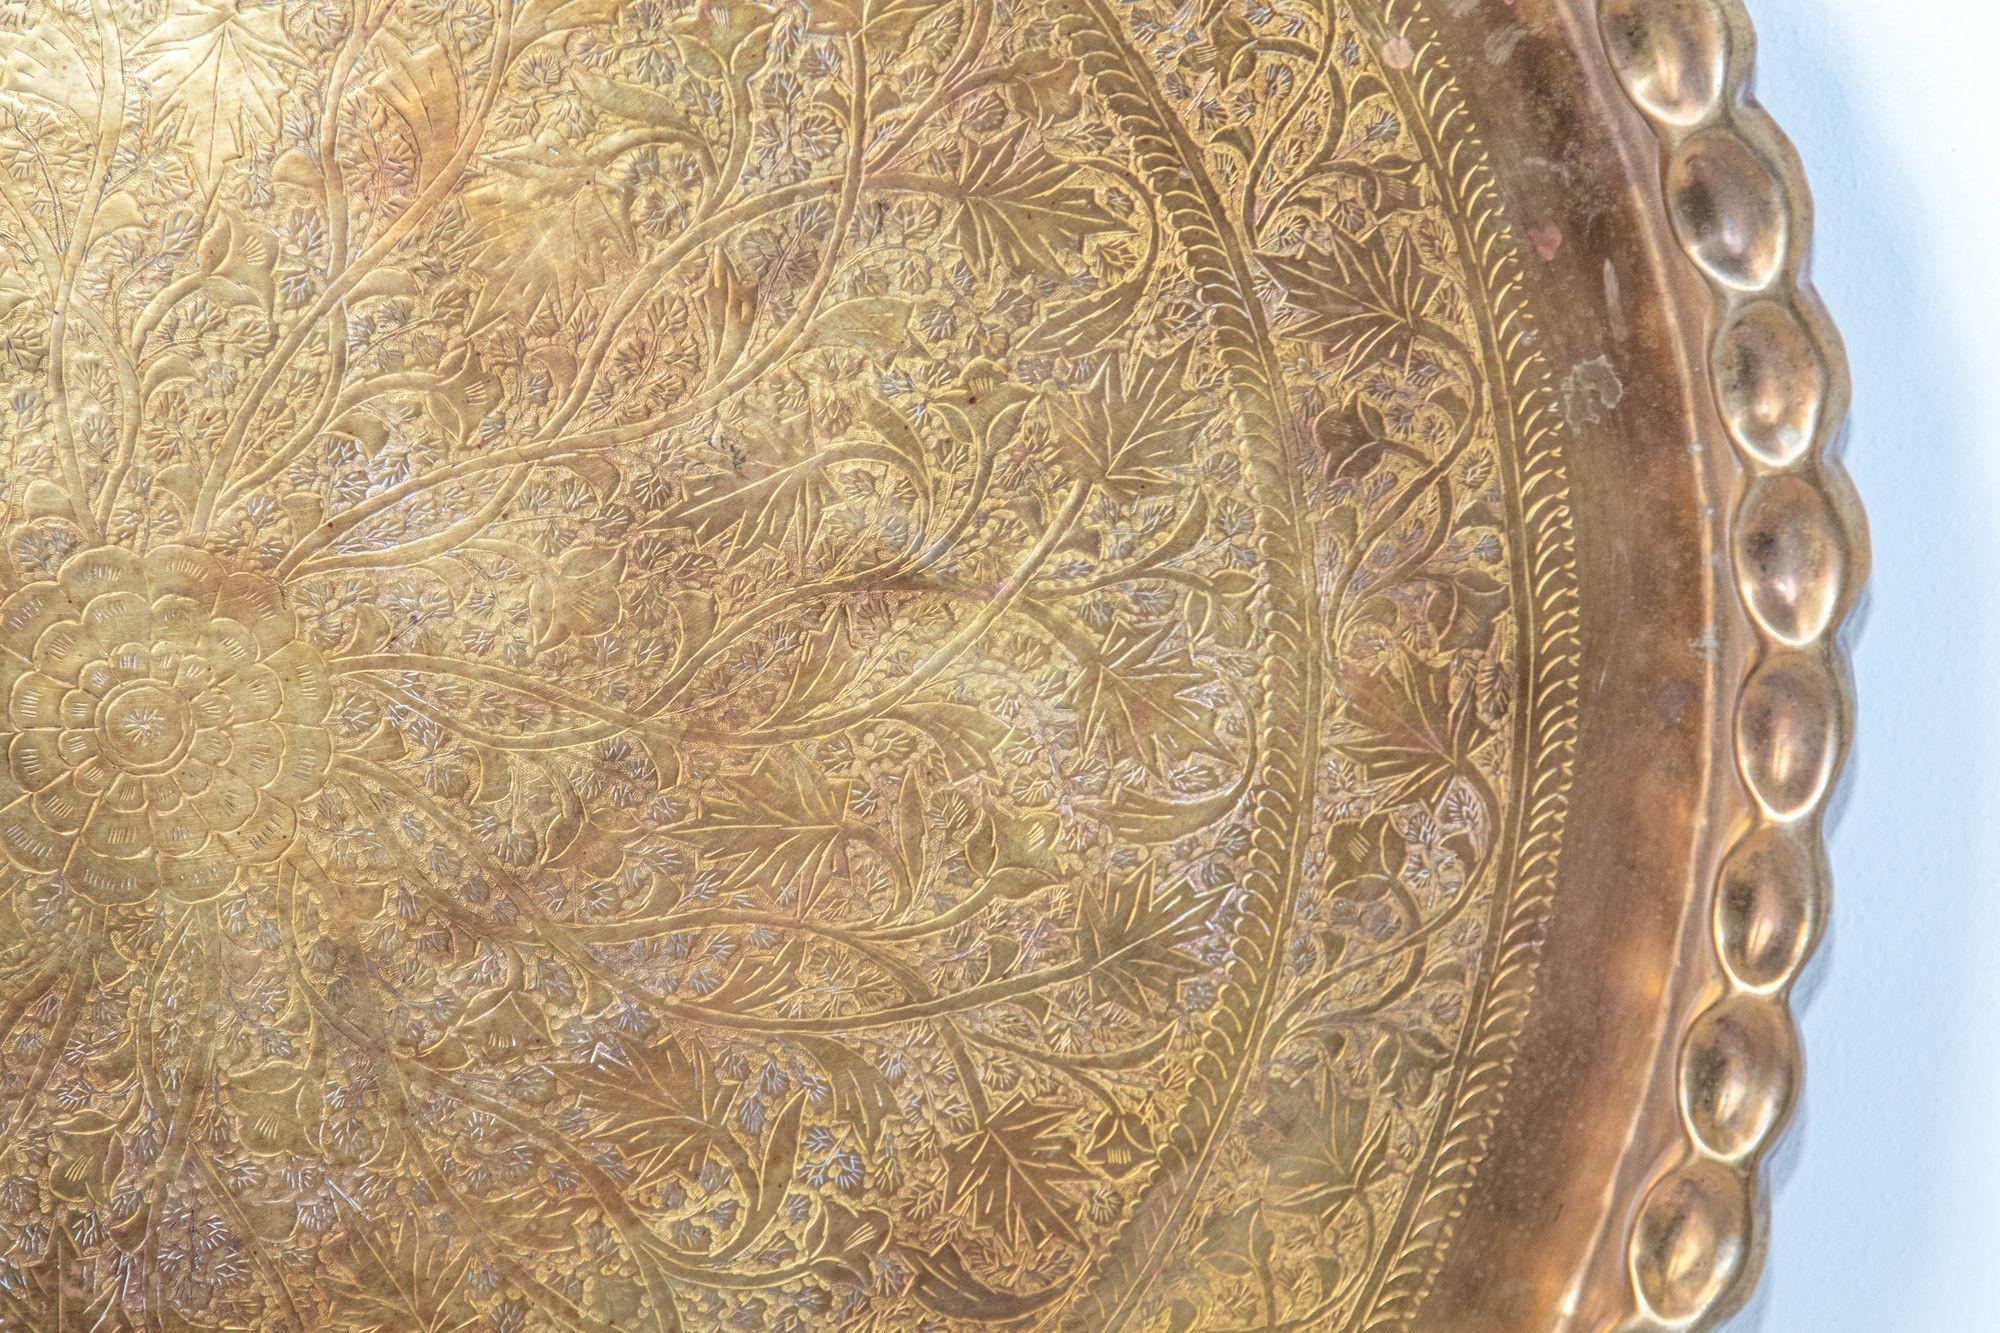 Hammered Asian Mughal Rajasthani Large Polished Round Brass Tray with Crest Edges 37 in D